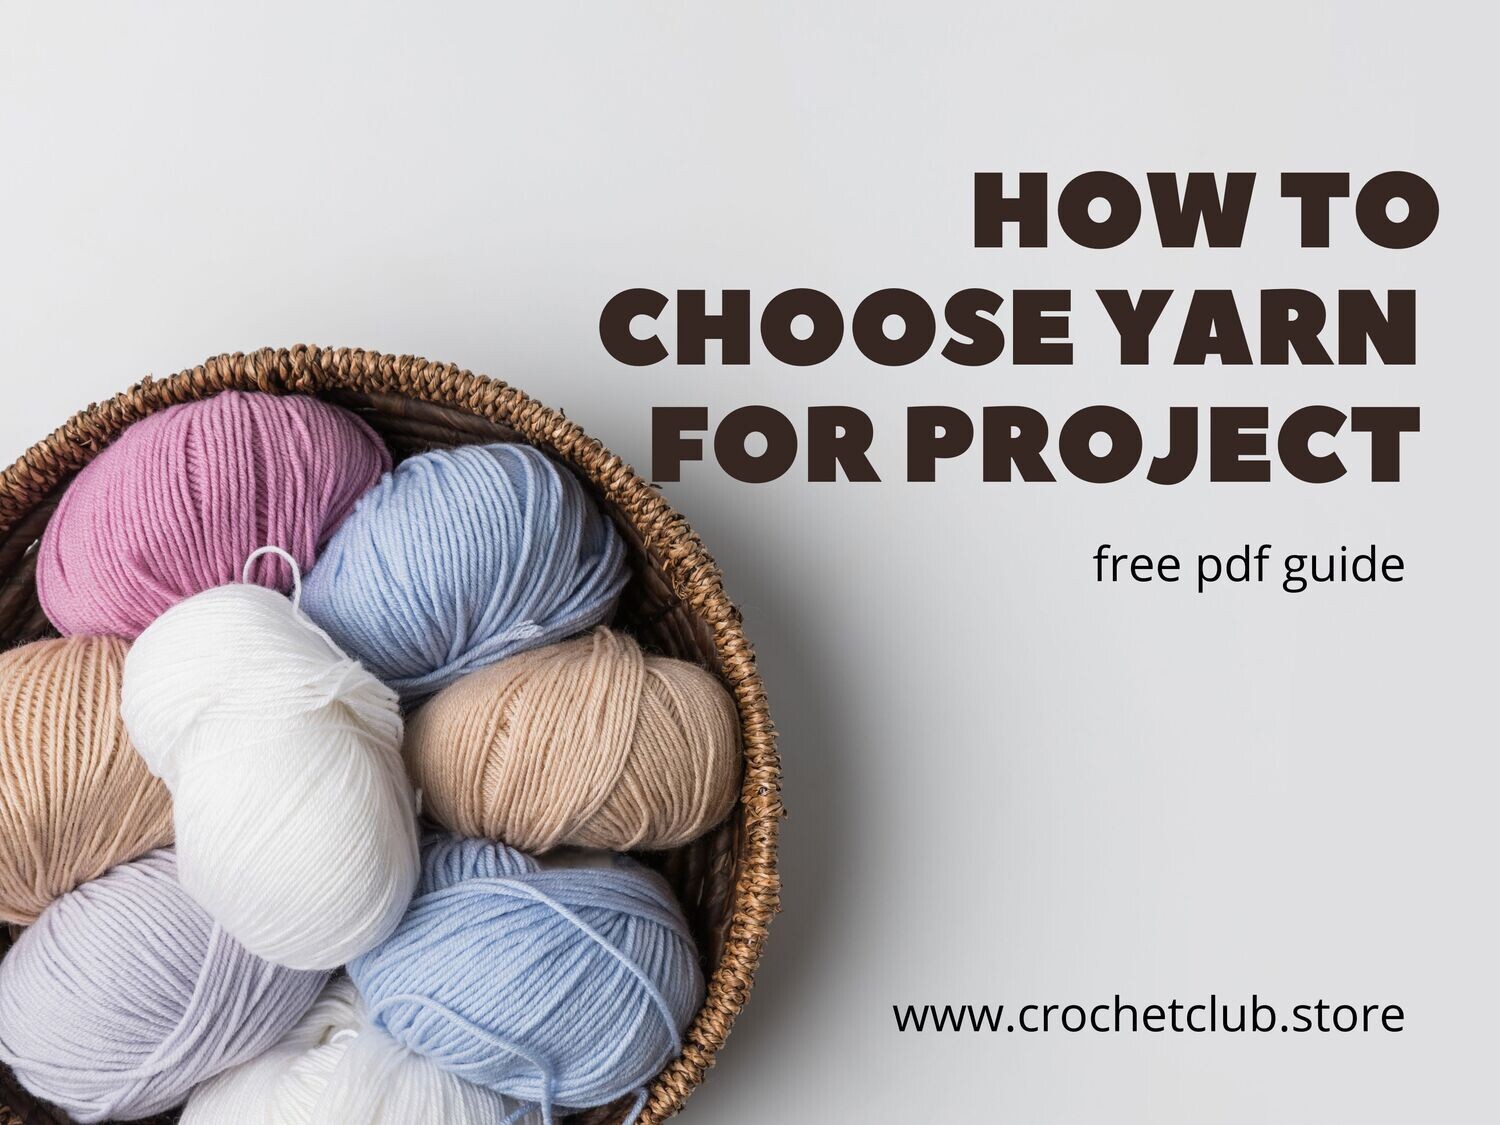 Guide: How to choose yarn for the project